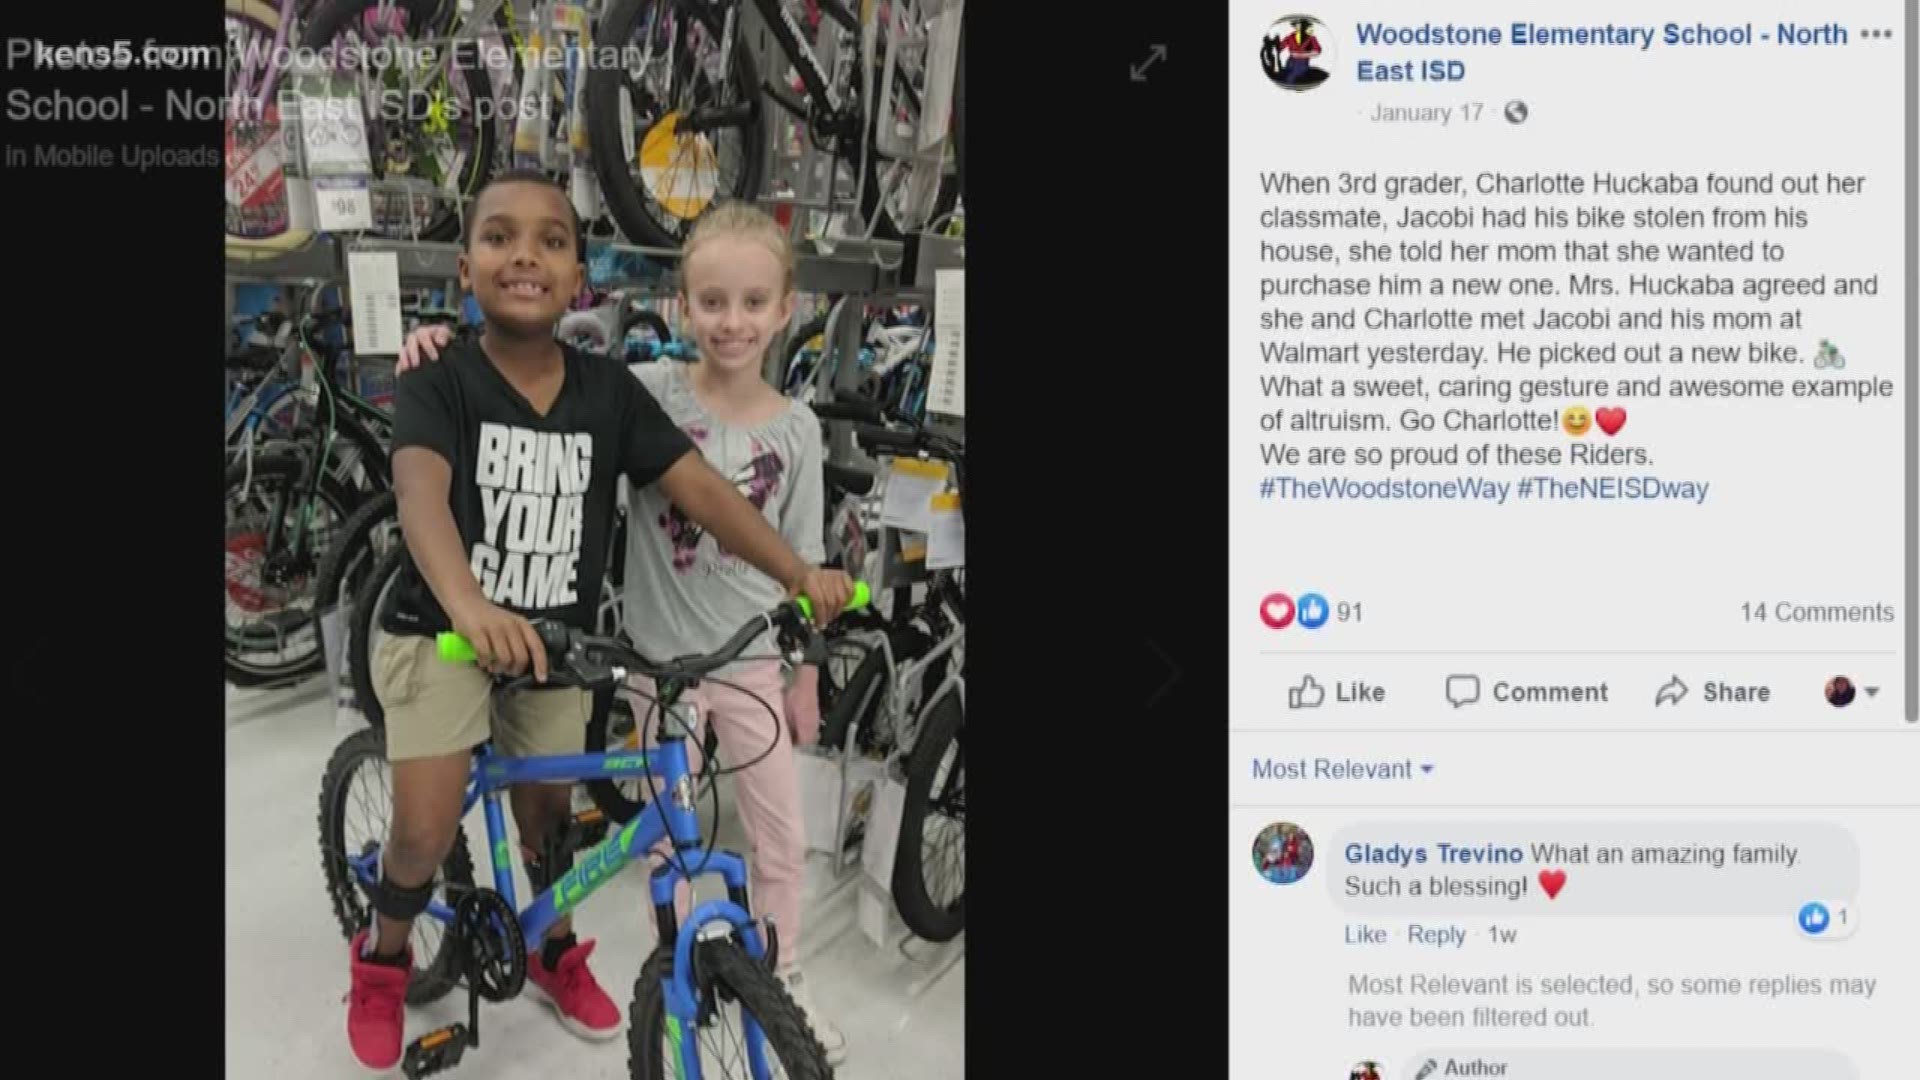 A local kid is garnering some much-deserved praise after going above and beyond to help a classmate in need.